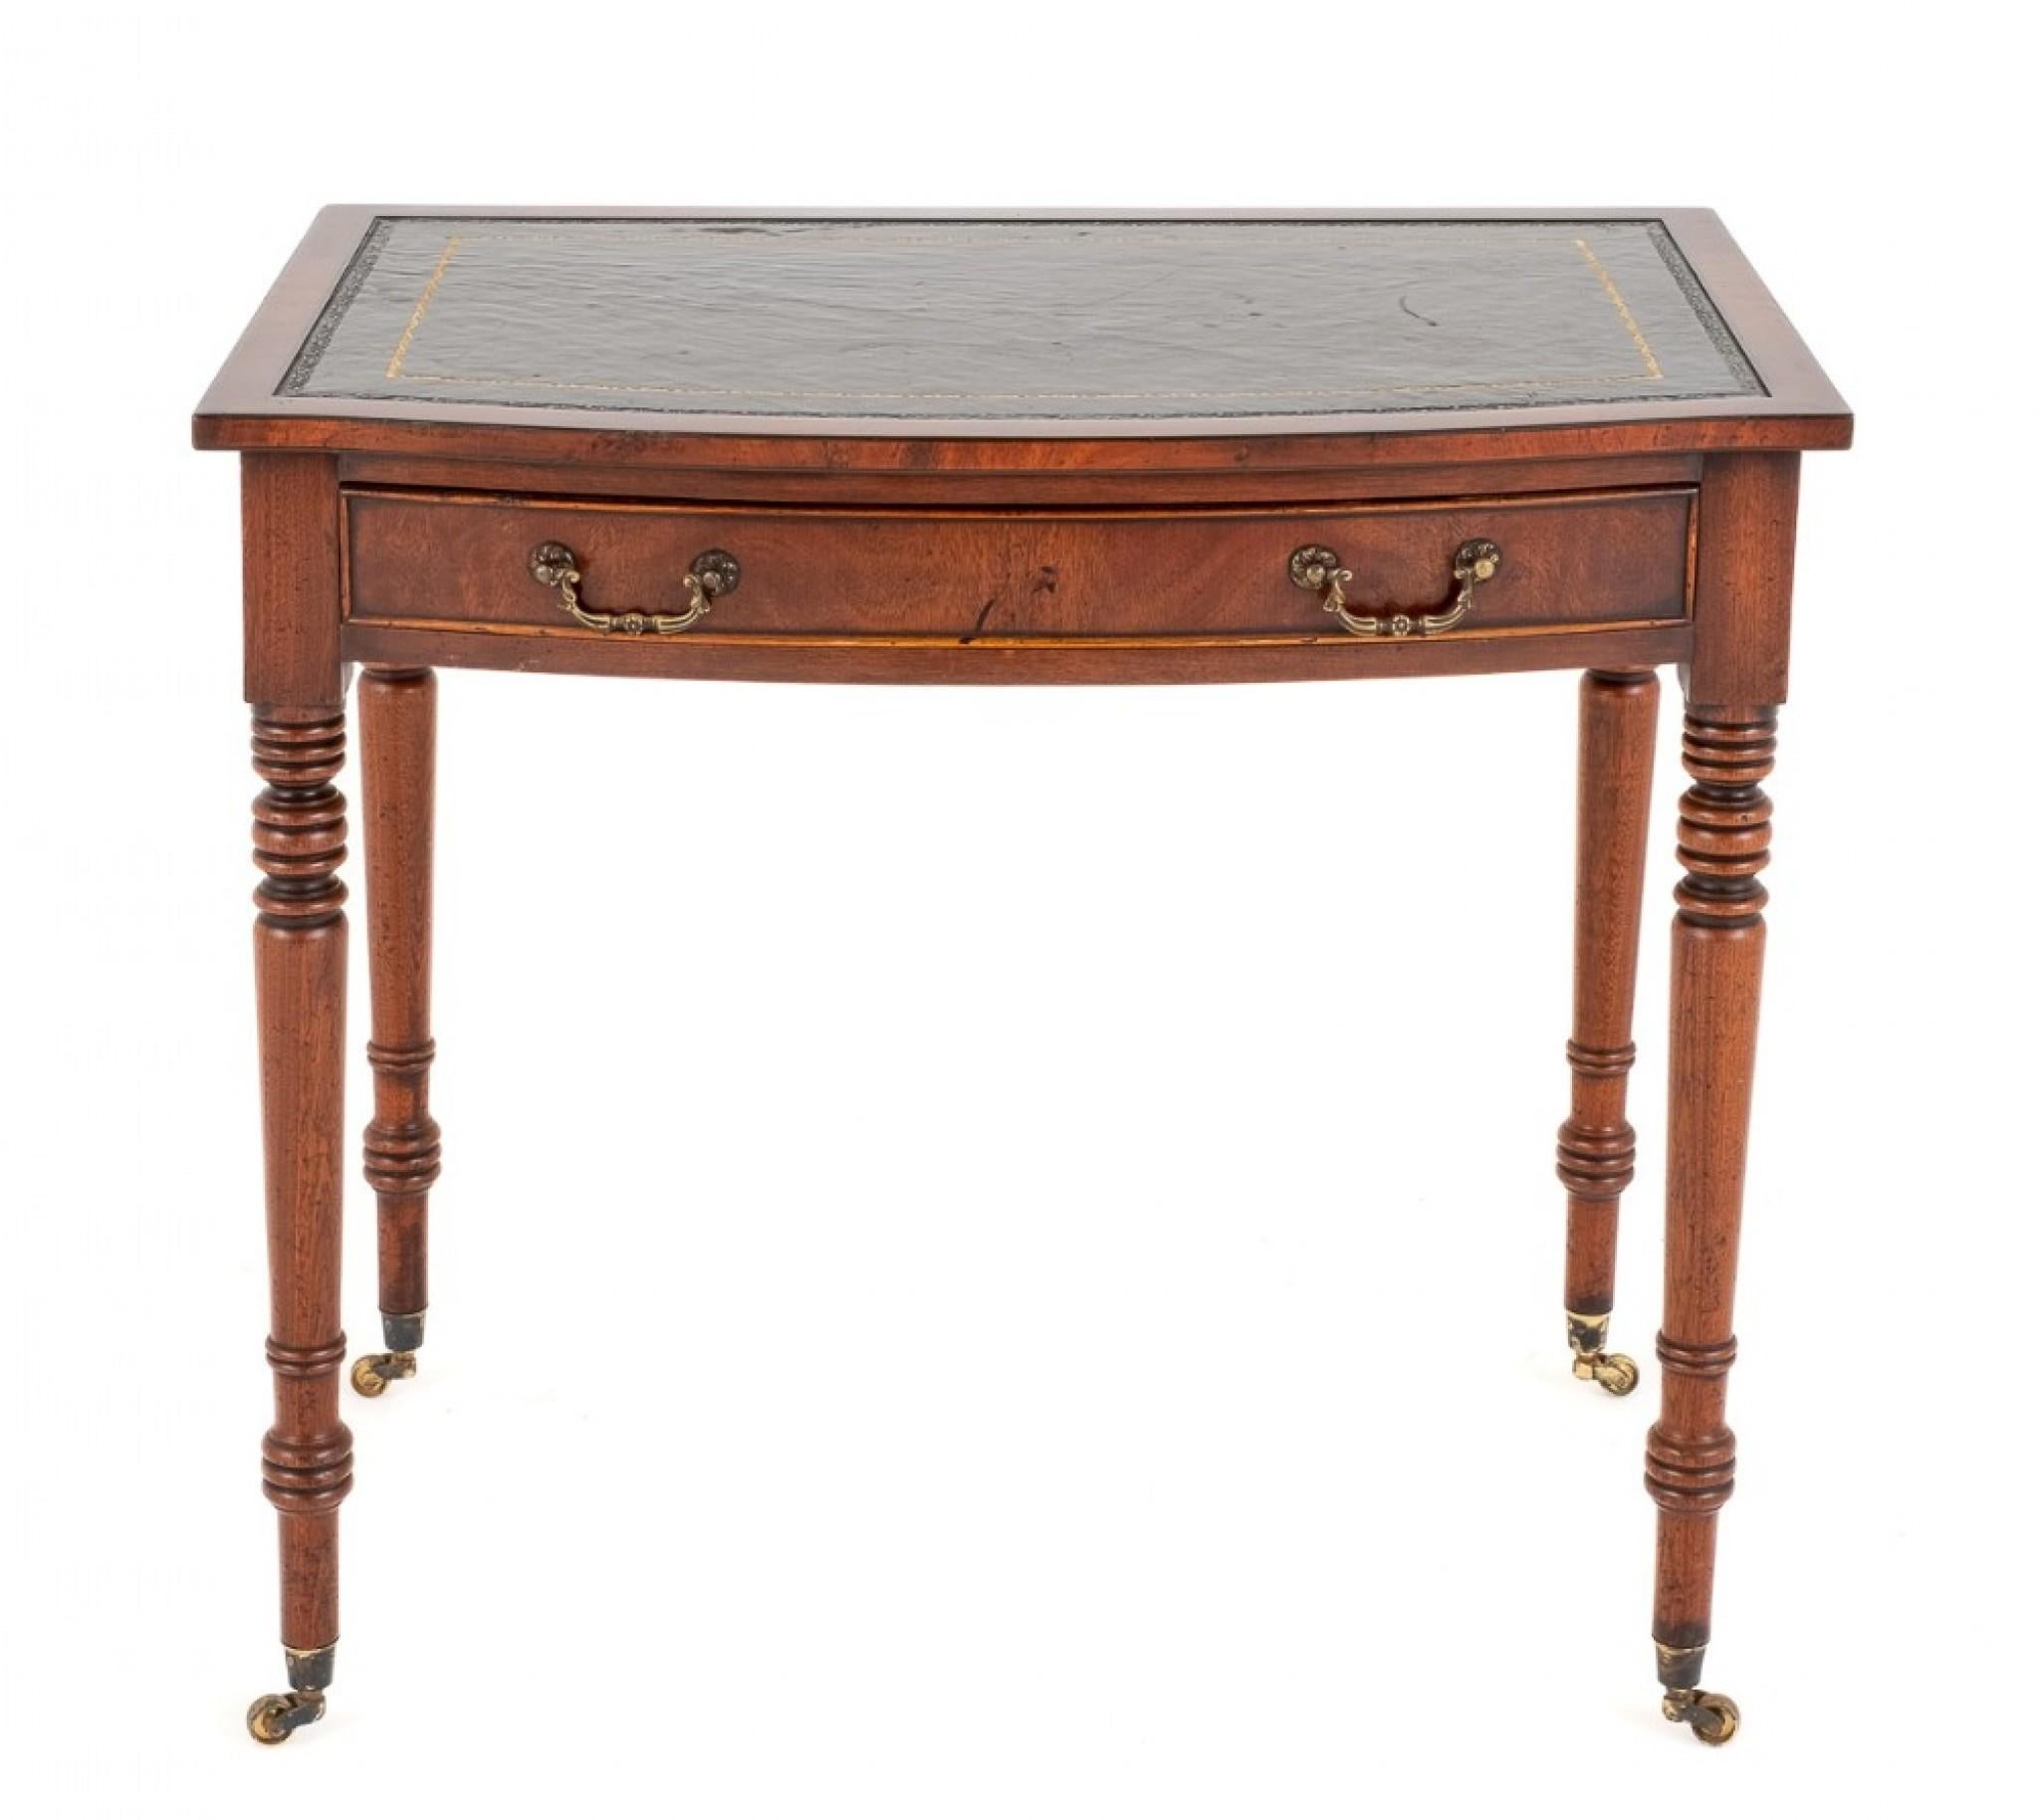 Mahogany Regency Revival 1 Drawer Writing Table.
This Rather Petite Writing Table is of a Bow Form.
Featuring 1 Oak Lined Drawer With Cast Brass Swan Neck Handles.
The Ring Turned Legs Being of a Typical Regency Influence Standing Upon Brass